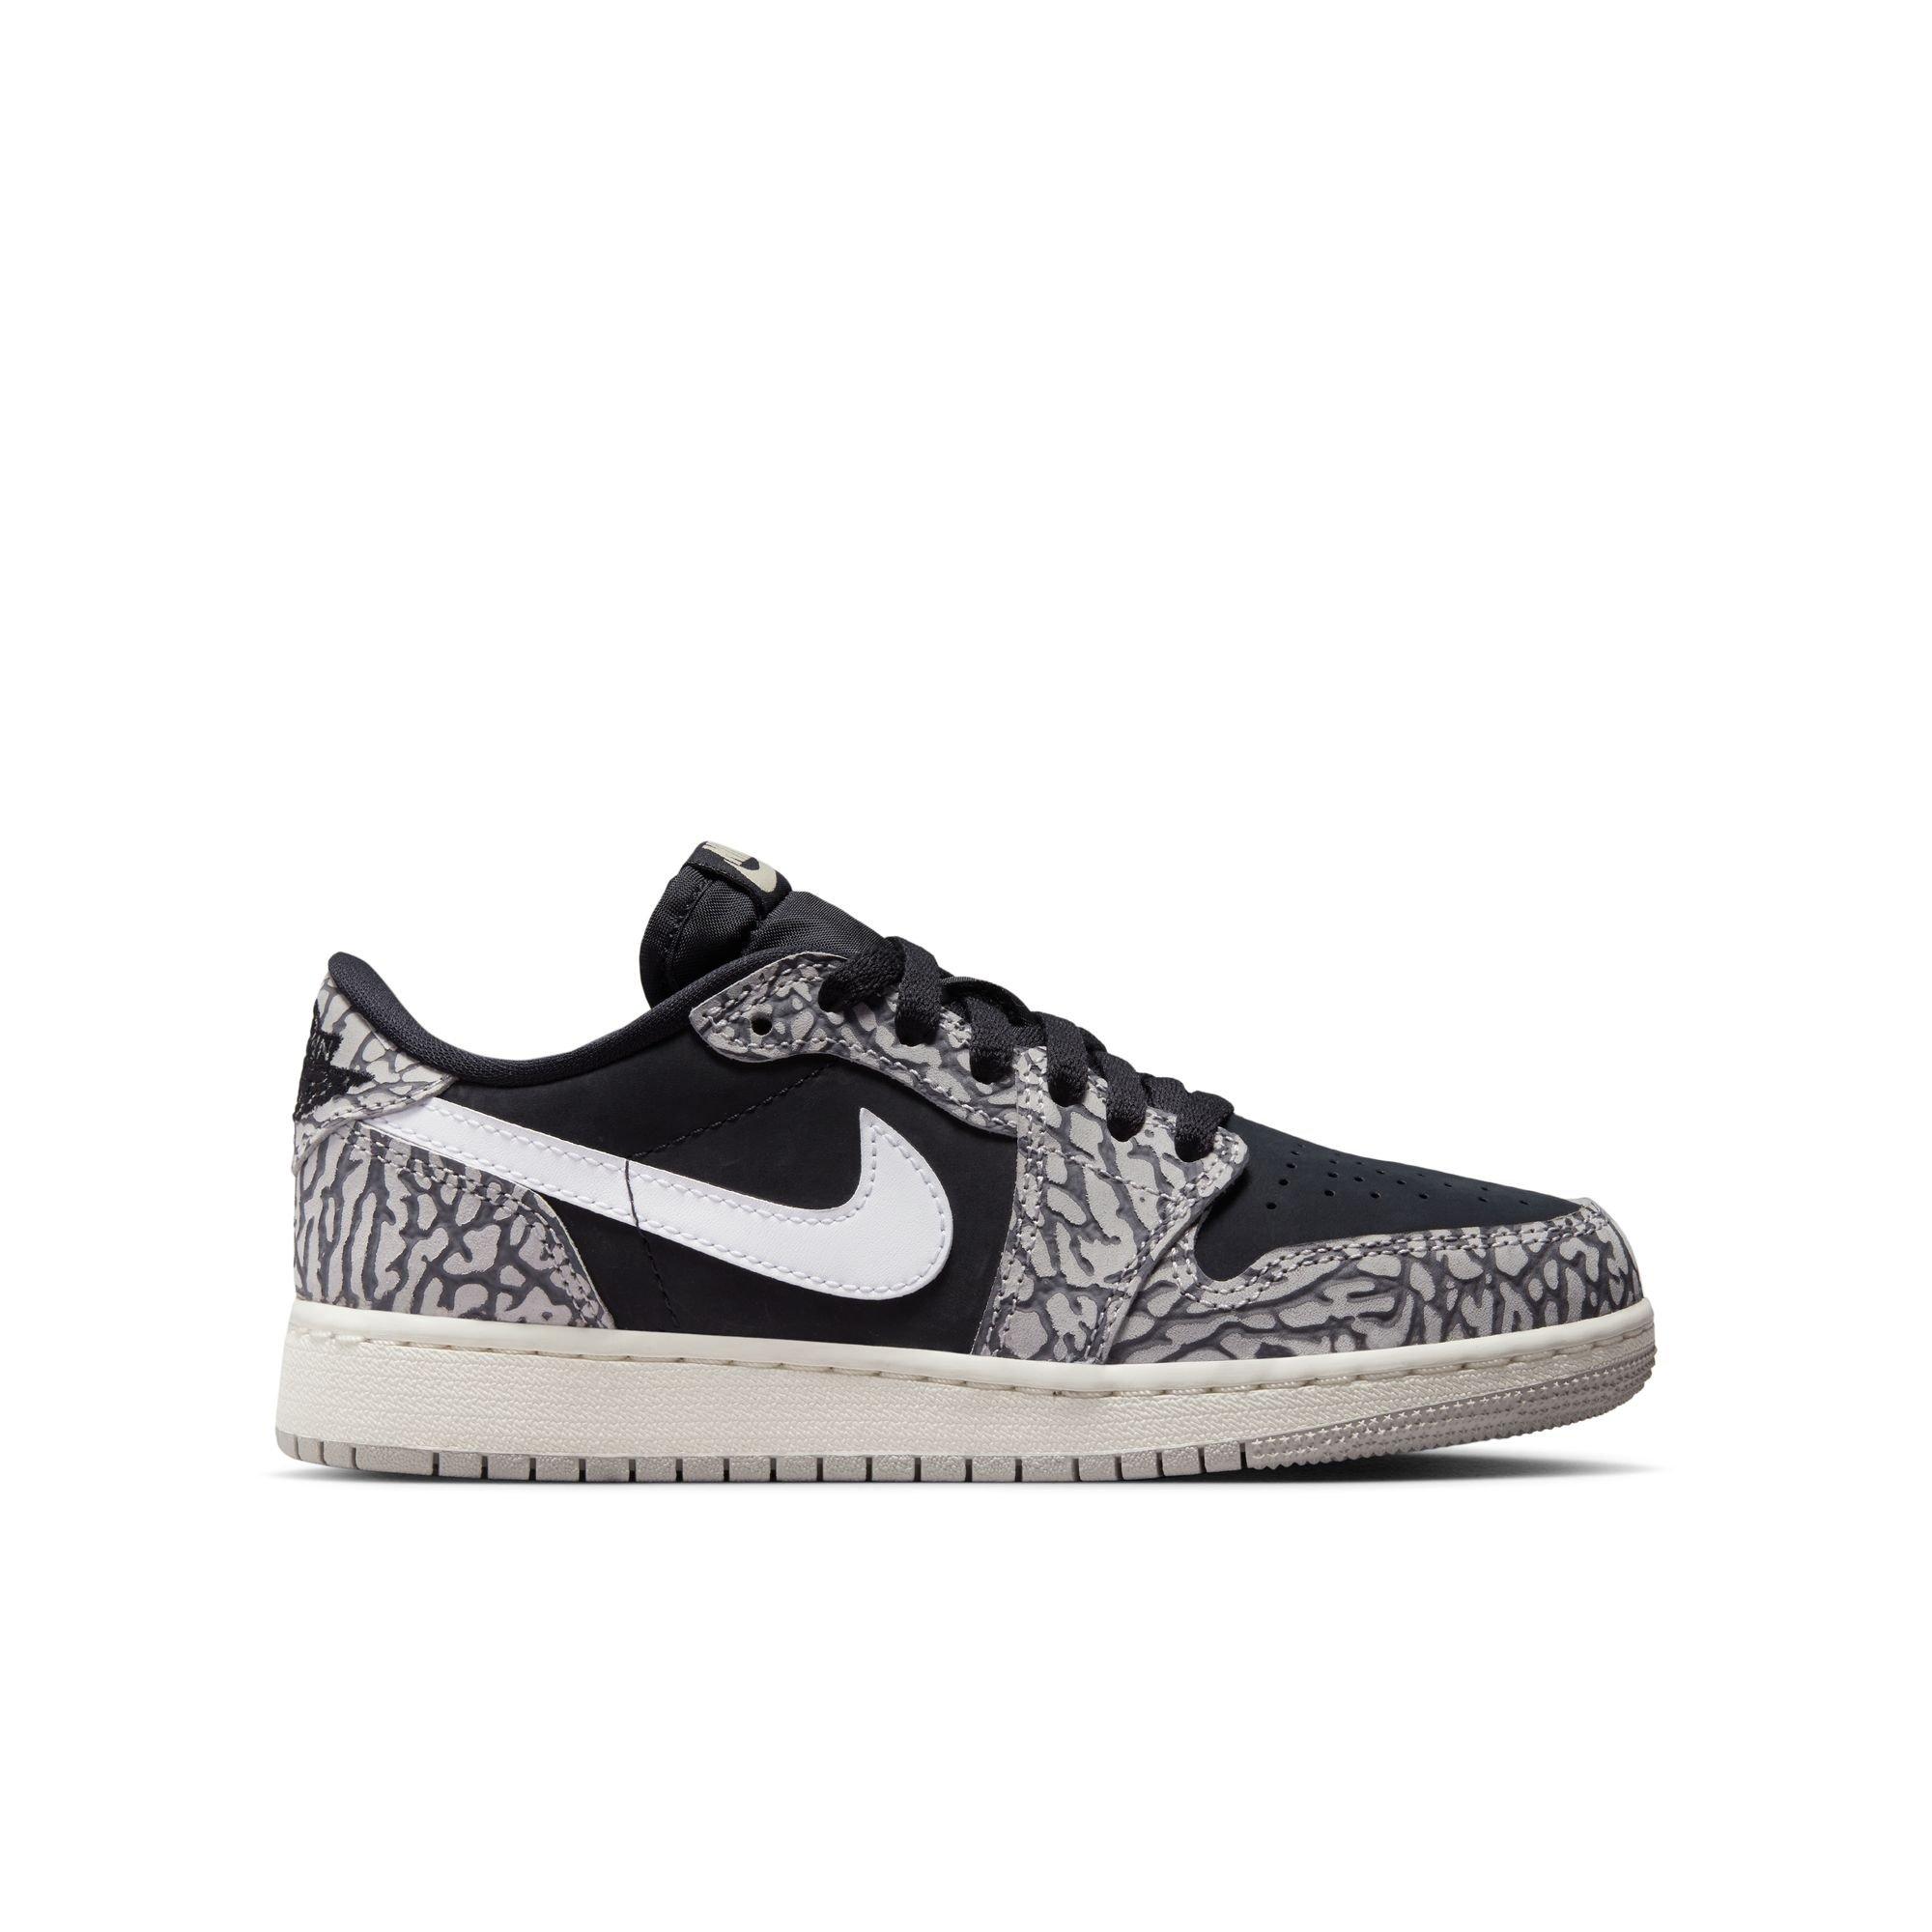 Air Jordan 1 Low OG Elephant Print  Black Cement  Review and On Foot 